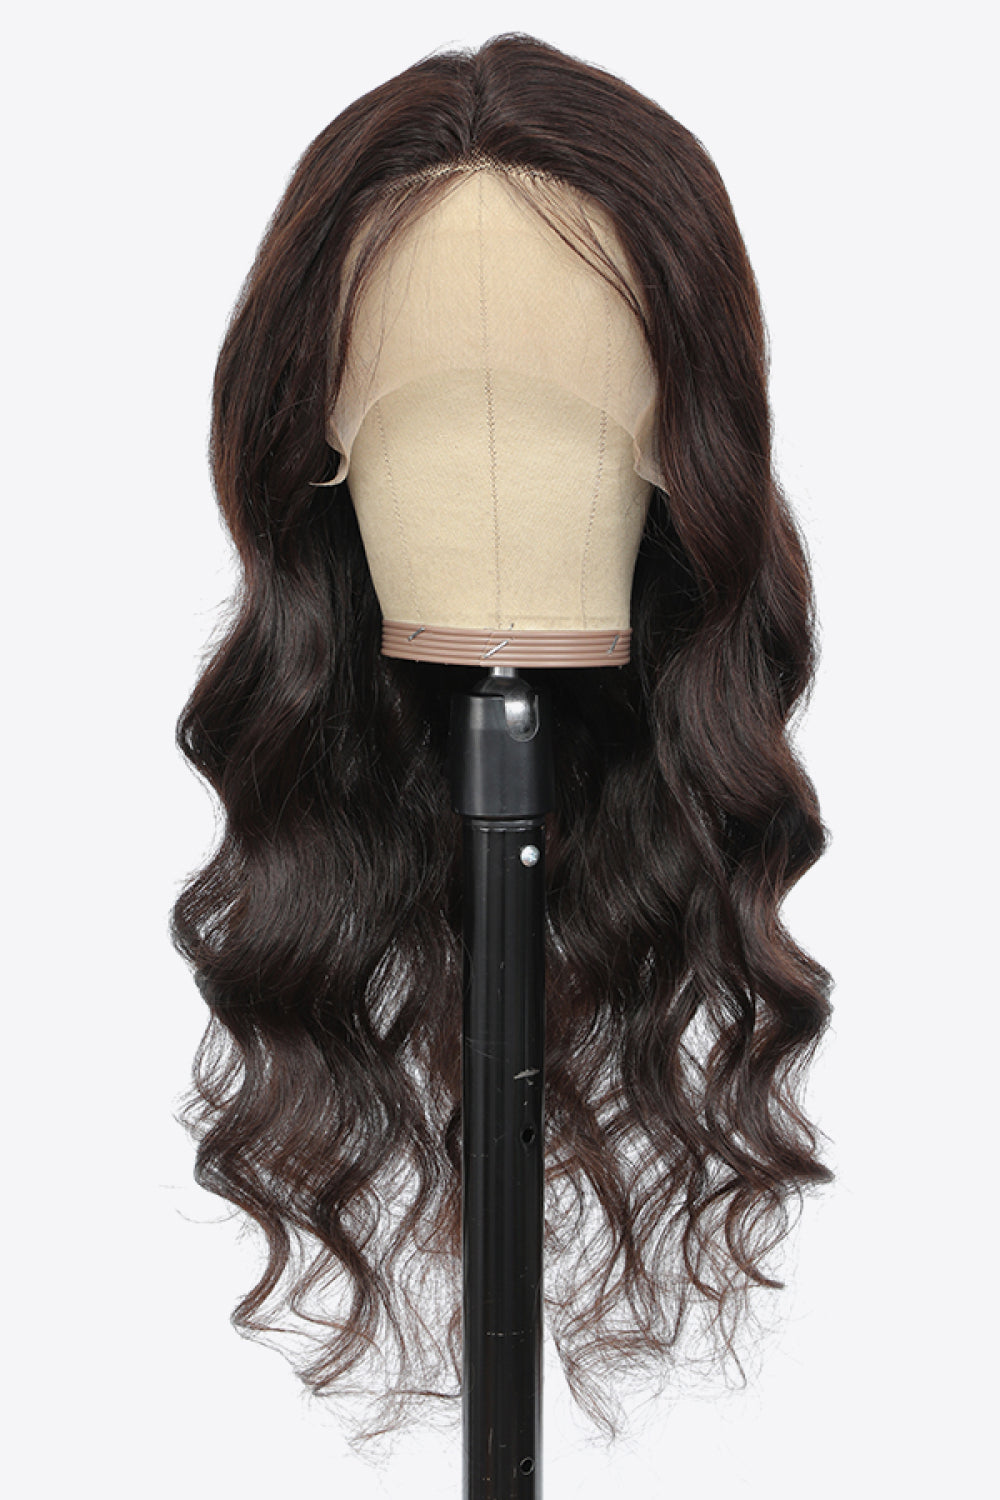 20" 13x4 Lace Front Wigs Body Wave Human Virgin Hair Natural Color 150% Density - AllIn Computer